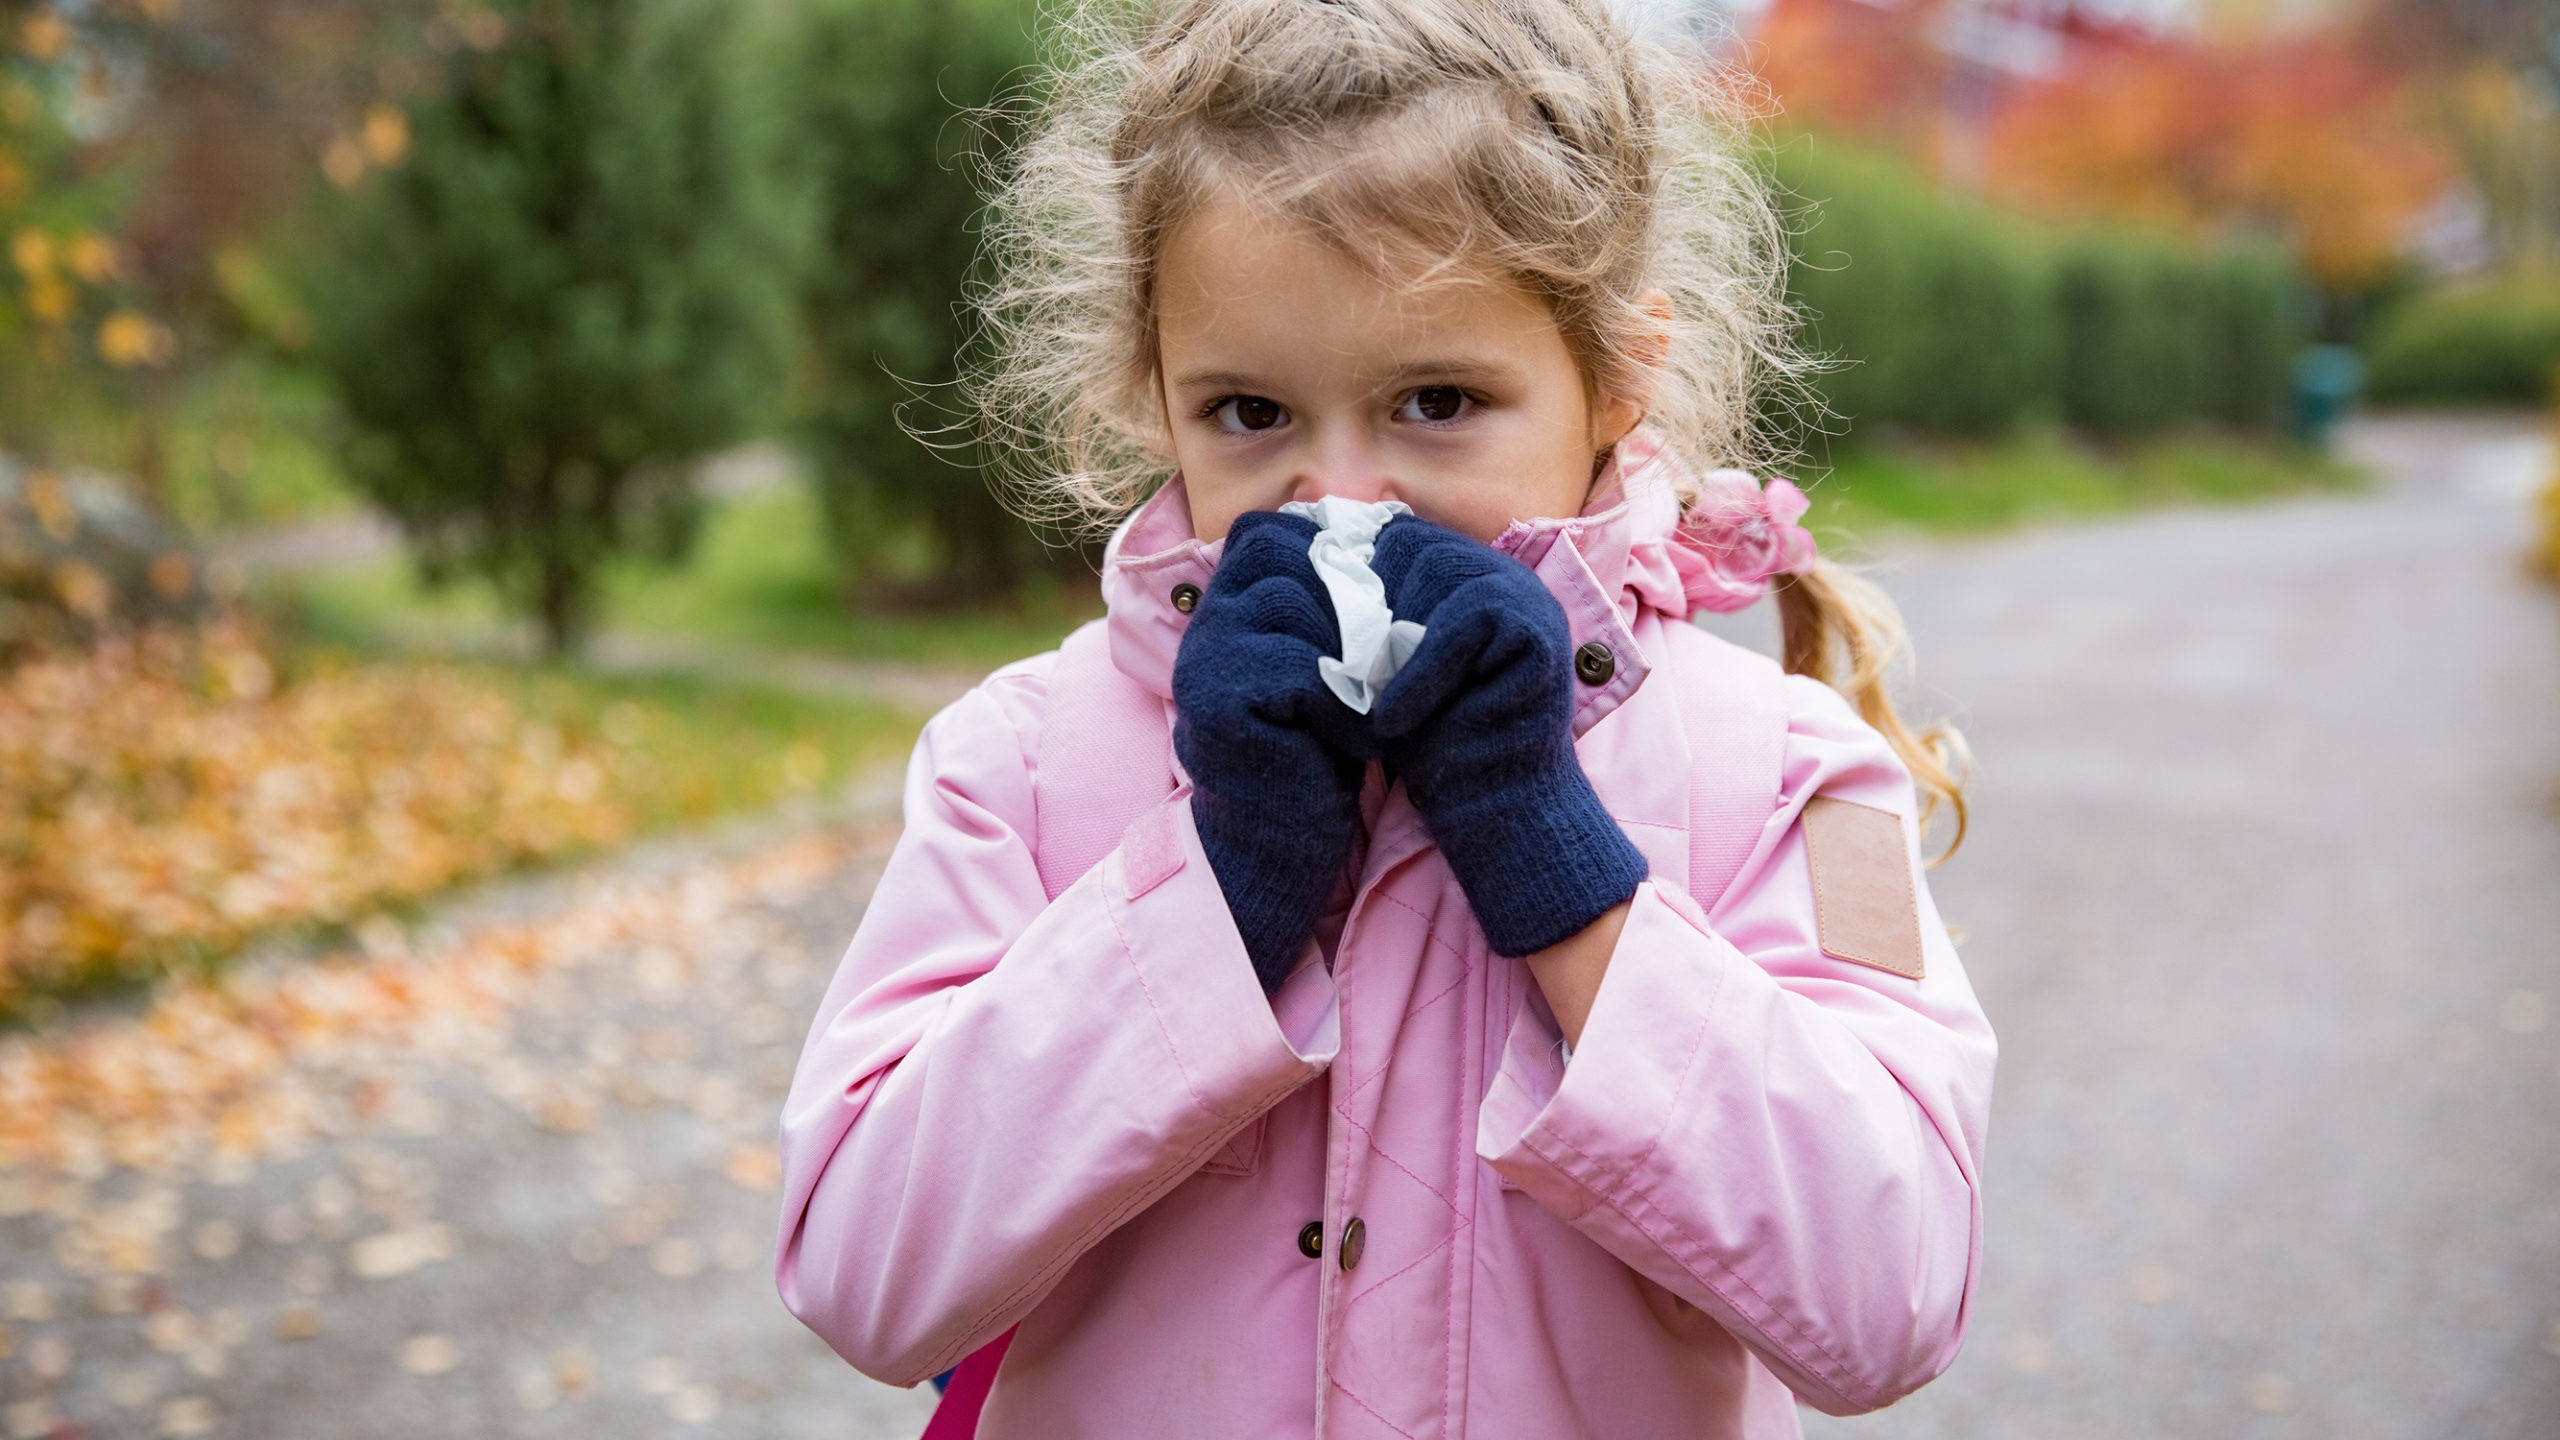 Should kids be sent home because of a runny nose?